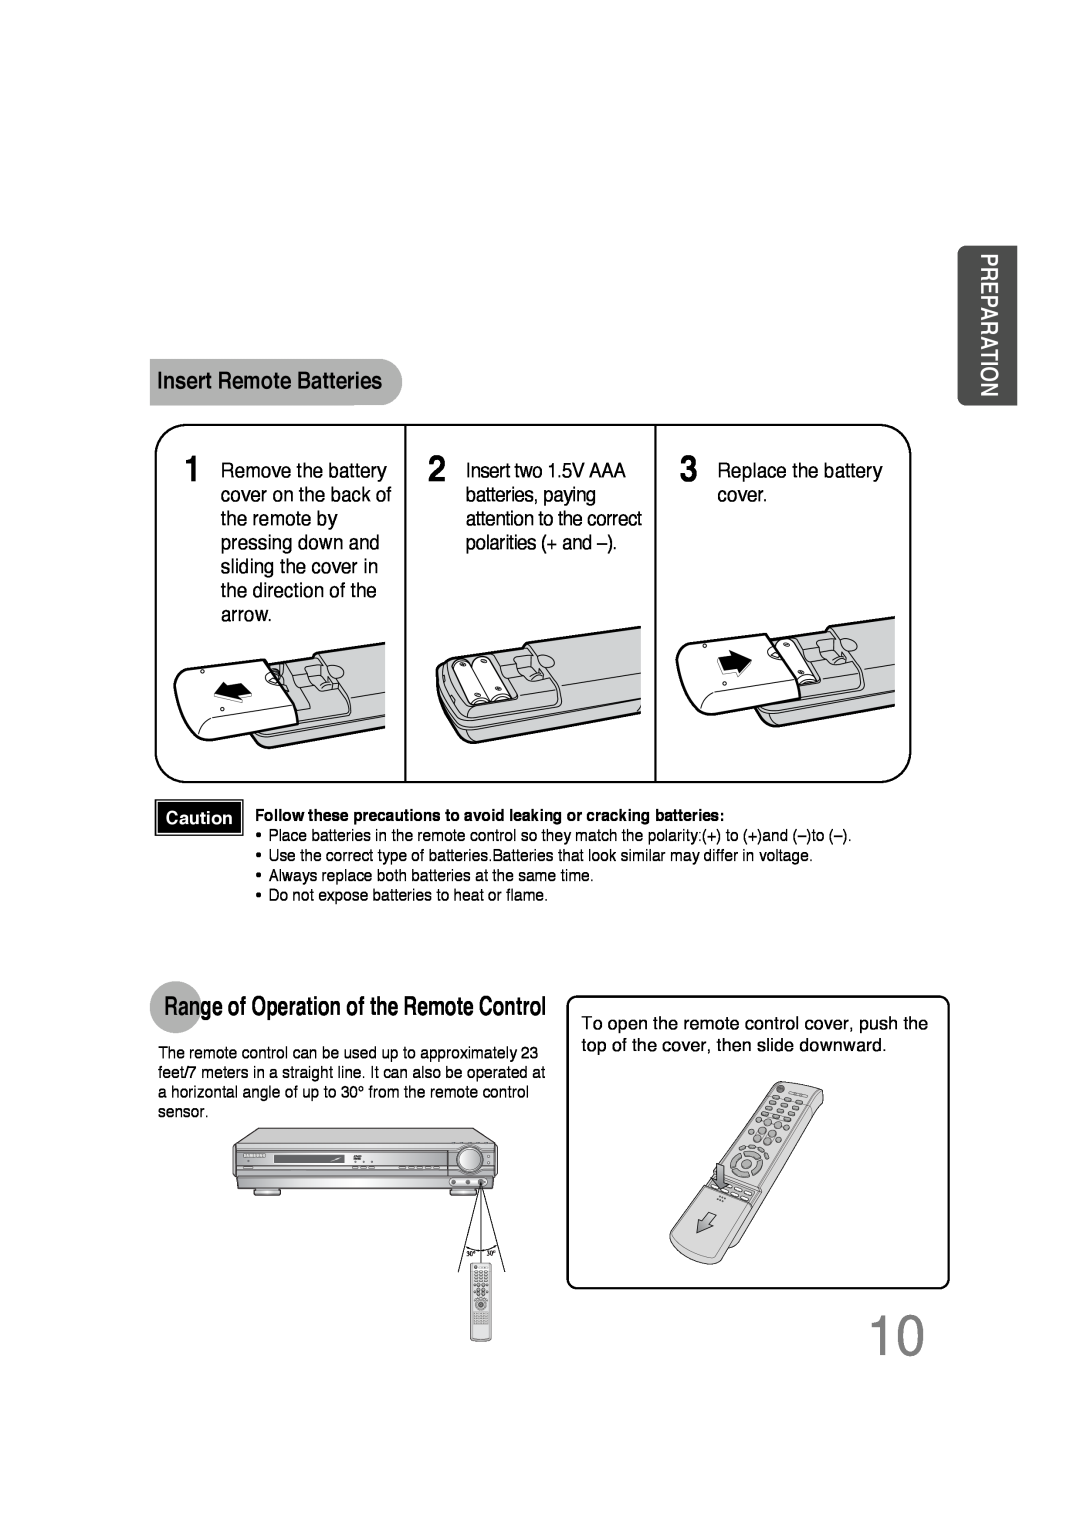 Samsung 20051111103302296 instruction manual Insert Remote Batteries, Preparation, Range of Operation of the Remote Control 